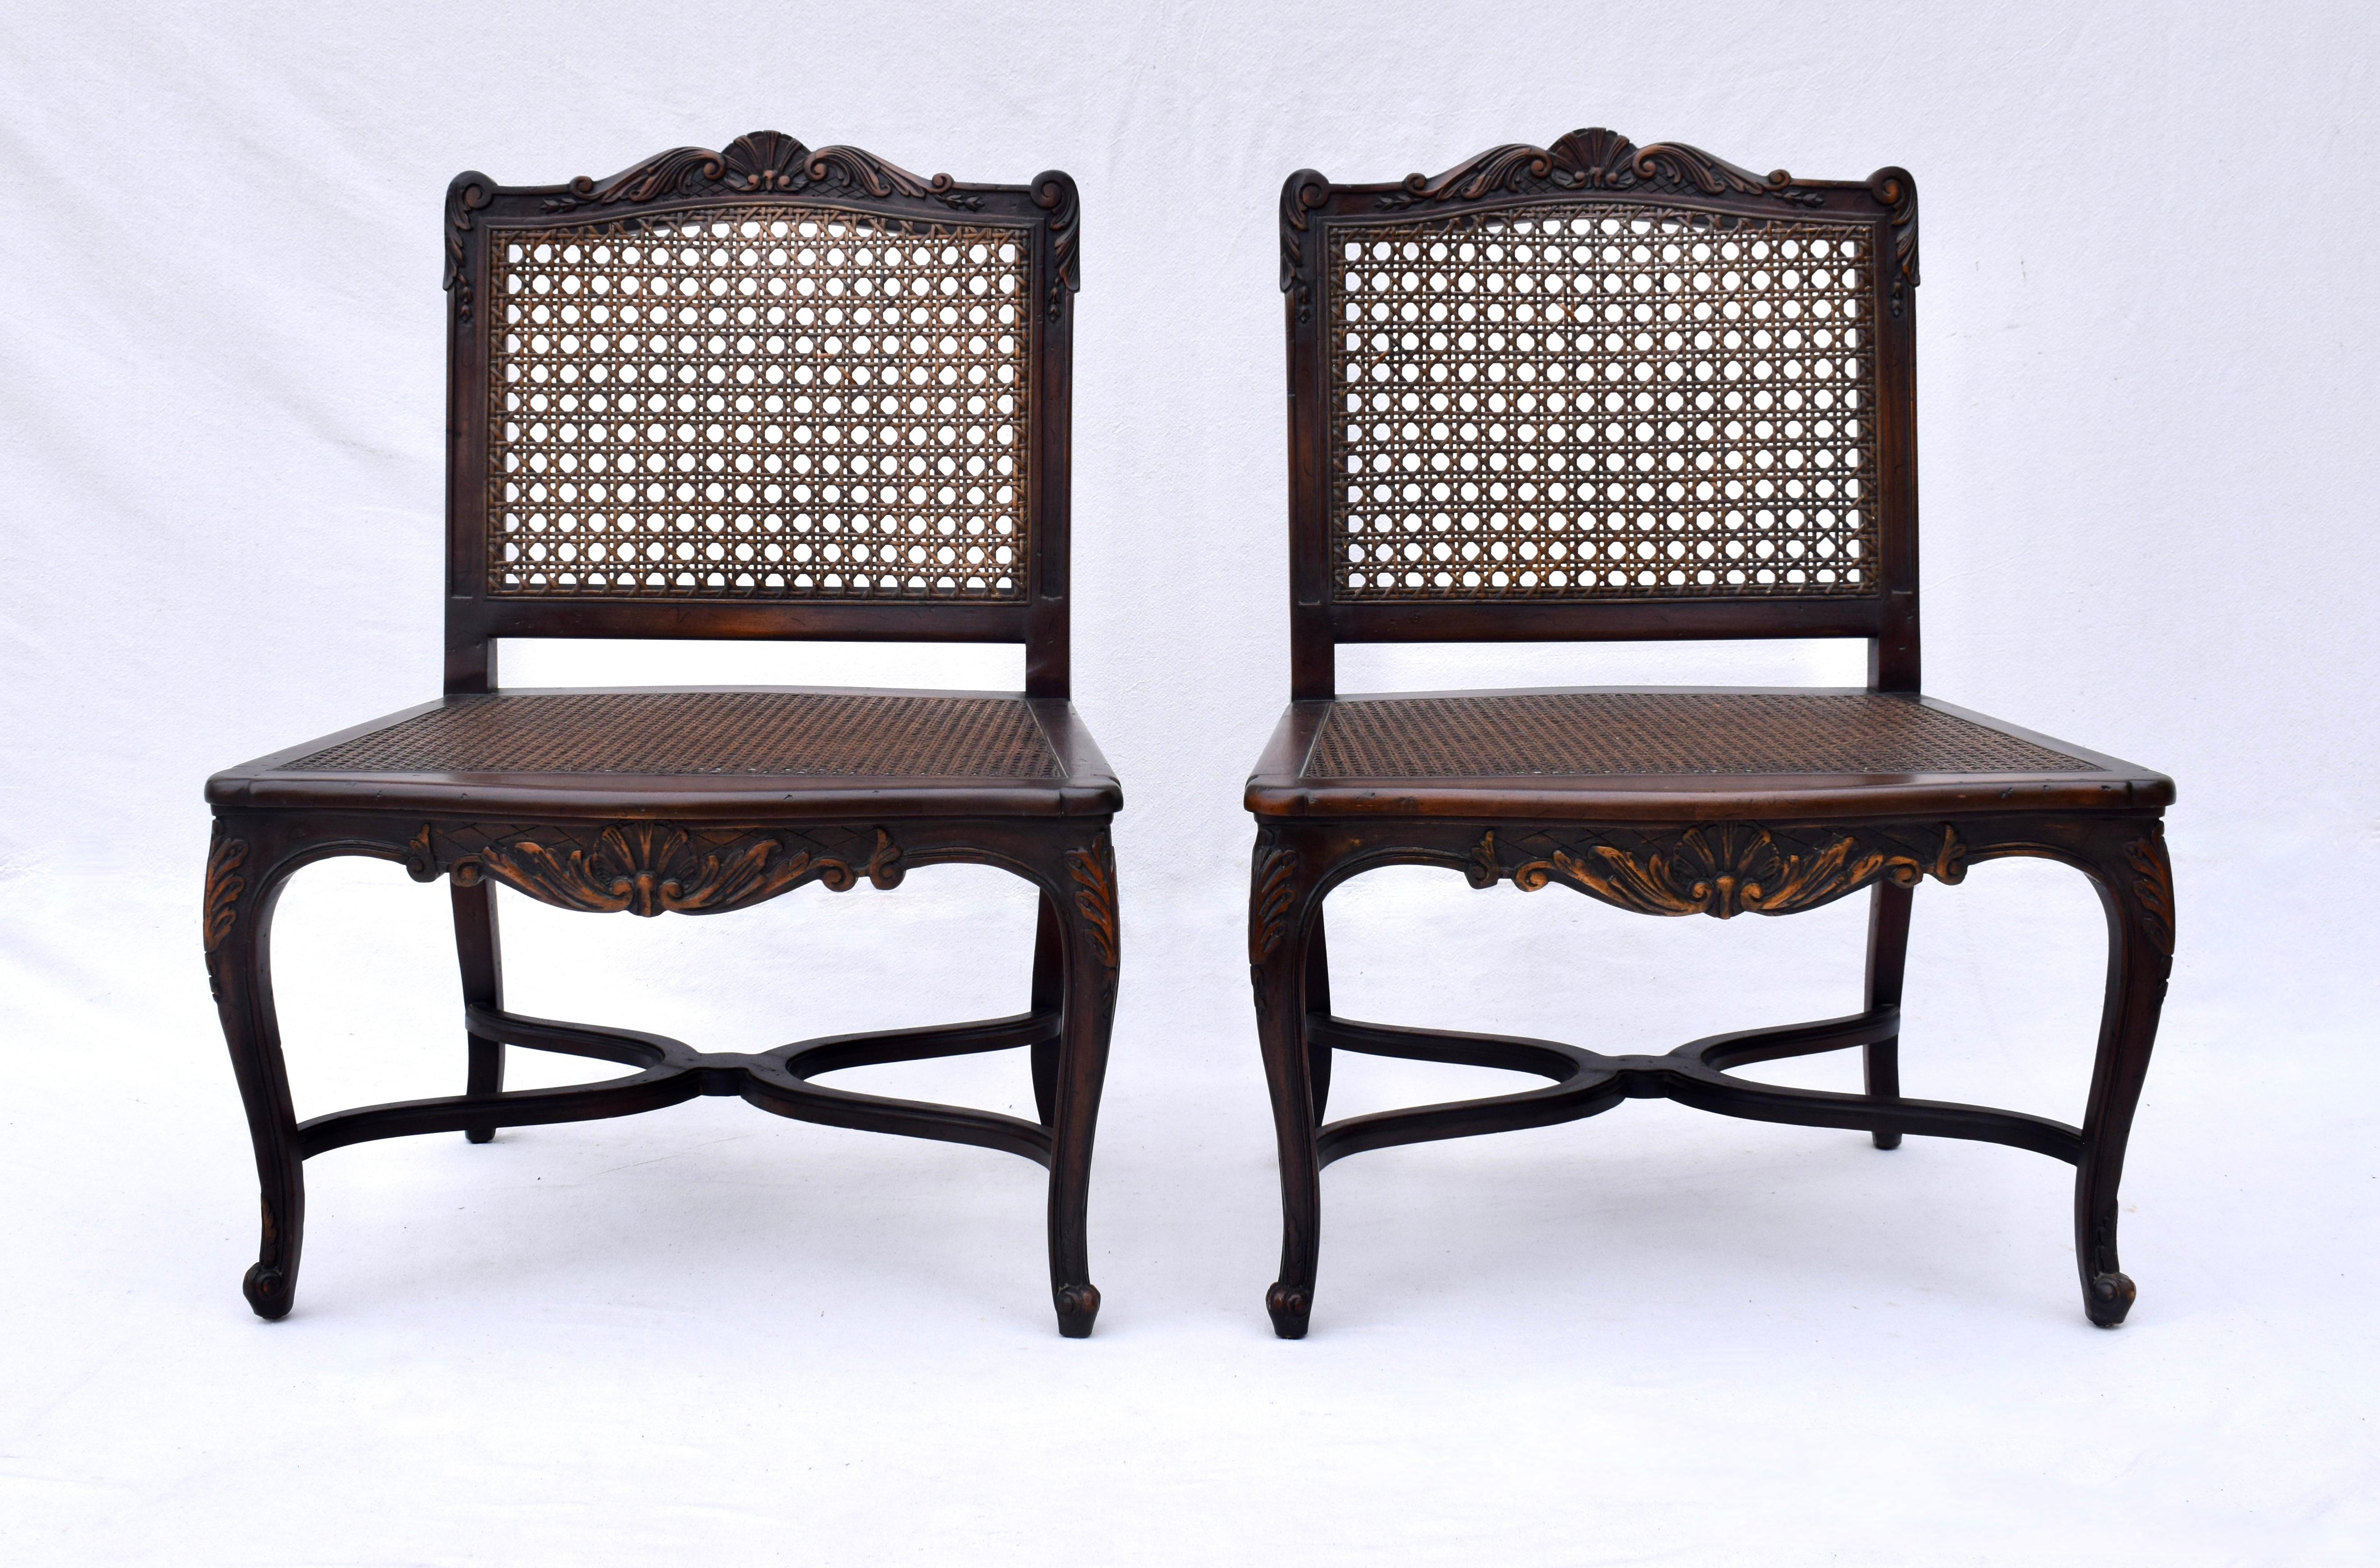 A pair of early 20th C. French Country slipper chairs with beautifully maintained cane seats & backs.  The pair is enhanced with custom cushions upholstered in the mid 1970's in Jack Lenor Larsen, Chevron velvet ; rarely if ever used condition